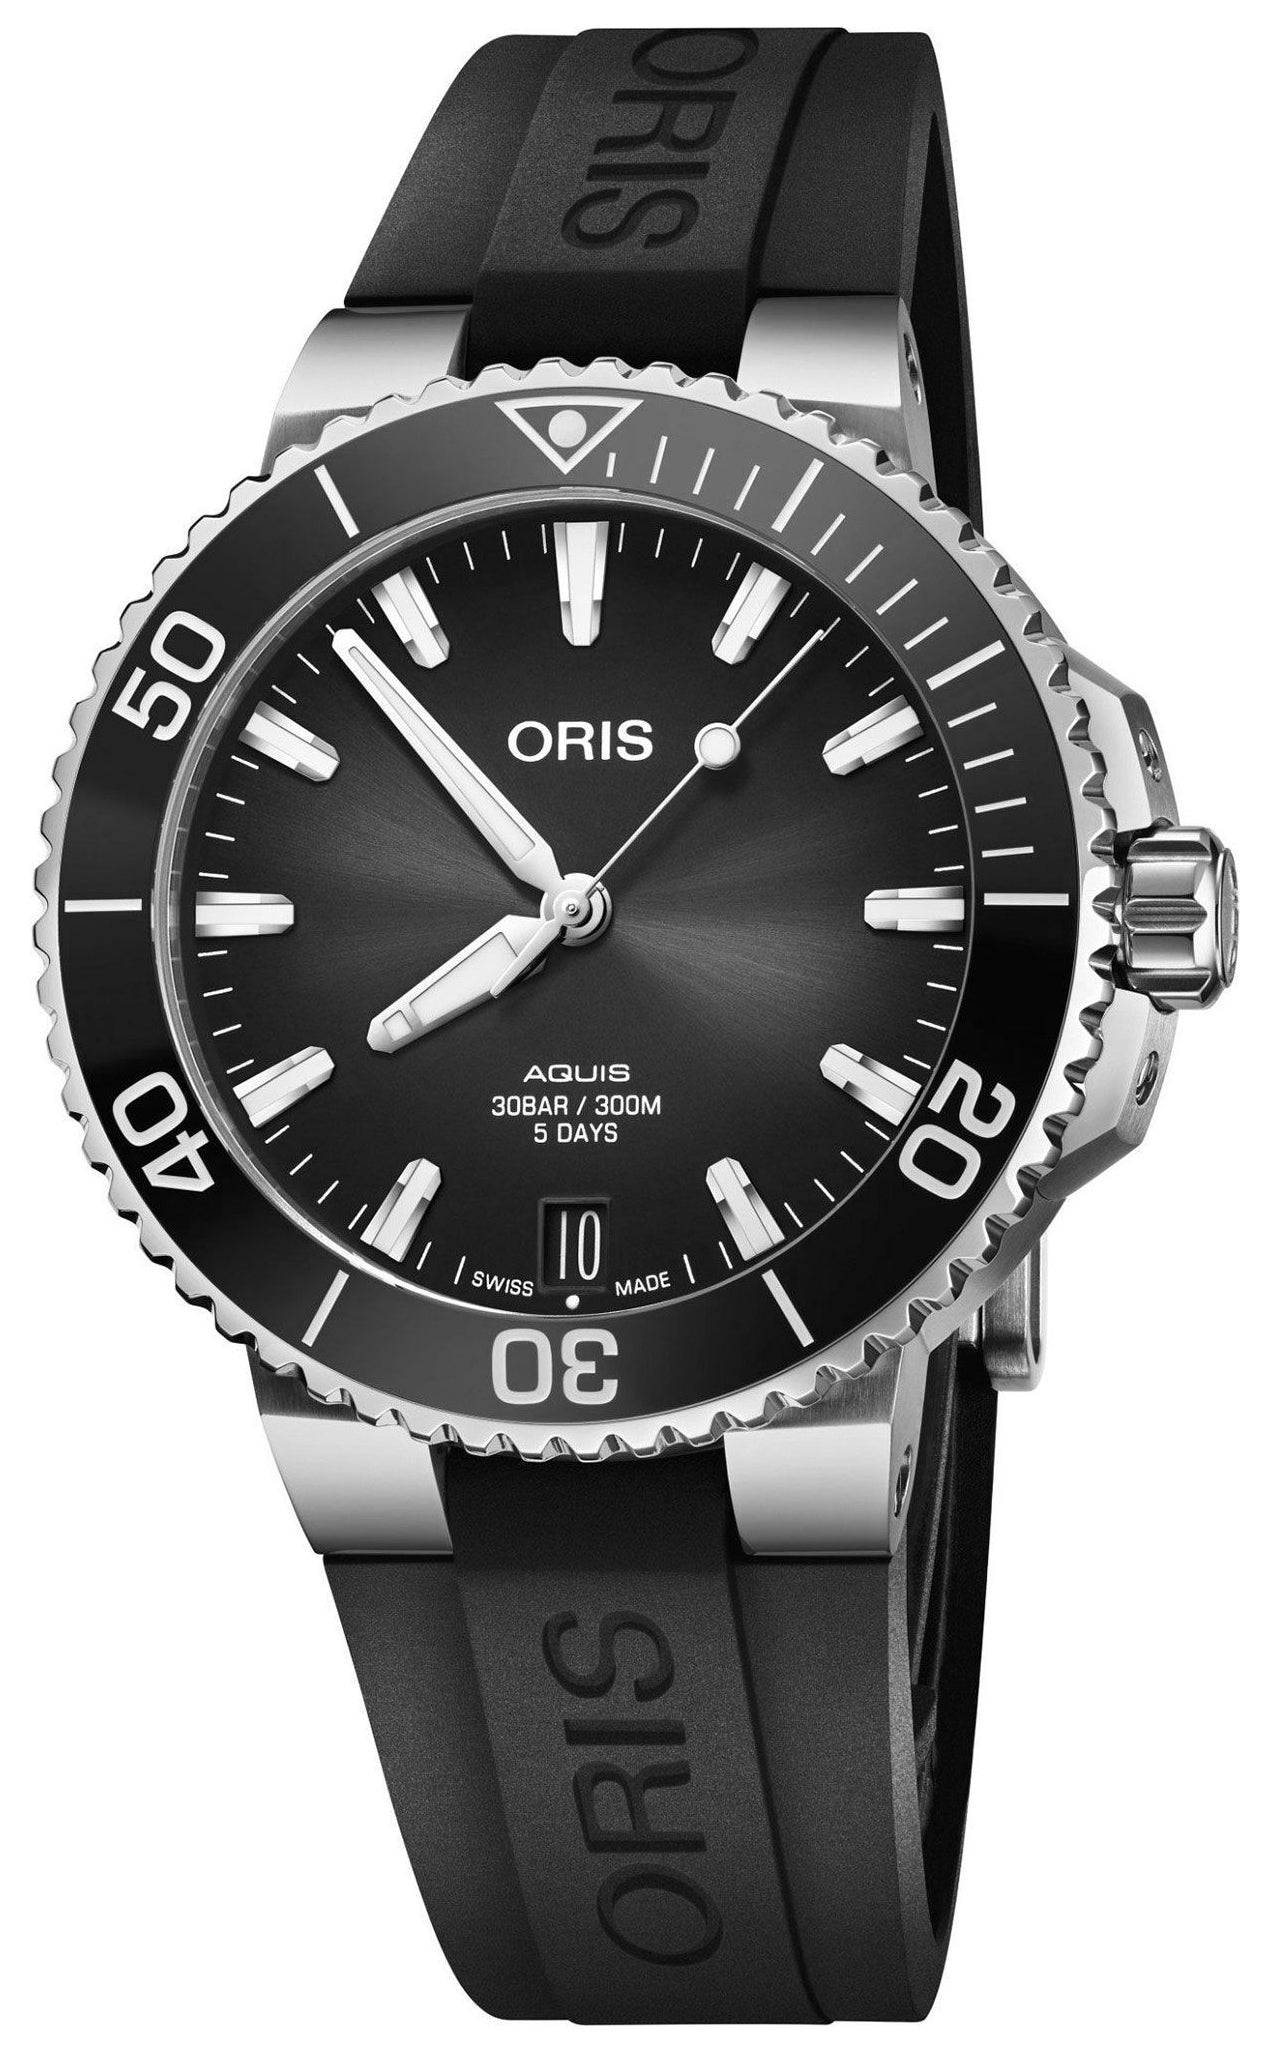 update alt-text with template Watches - Mens-Oris-400 7769 4154-RS-40 - 45 mm, Aquis, date, divers, gray, mens, menswatches, new arrivals, Oris, round, rpSKU_400 7763 4135-RS, rpSKU_400 7769 4135-RS, rpSKU_400 7769 4154-MB, rpSKU_400 7769 4157-MB, rpSKU_400 7769 4157-RS, rubber, stainless steel case, swiss automatic, uni-directional rotating bezel, watches-Watches & Beyond